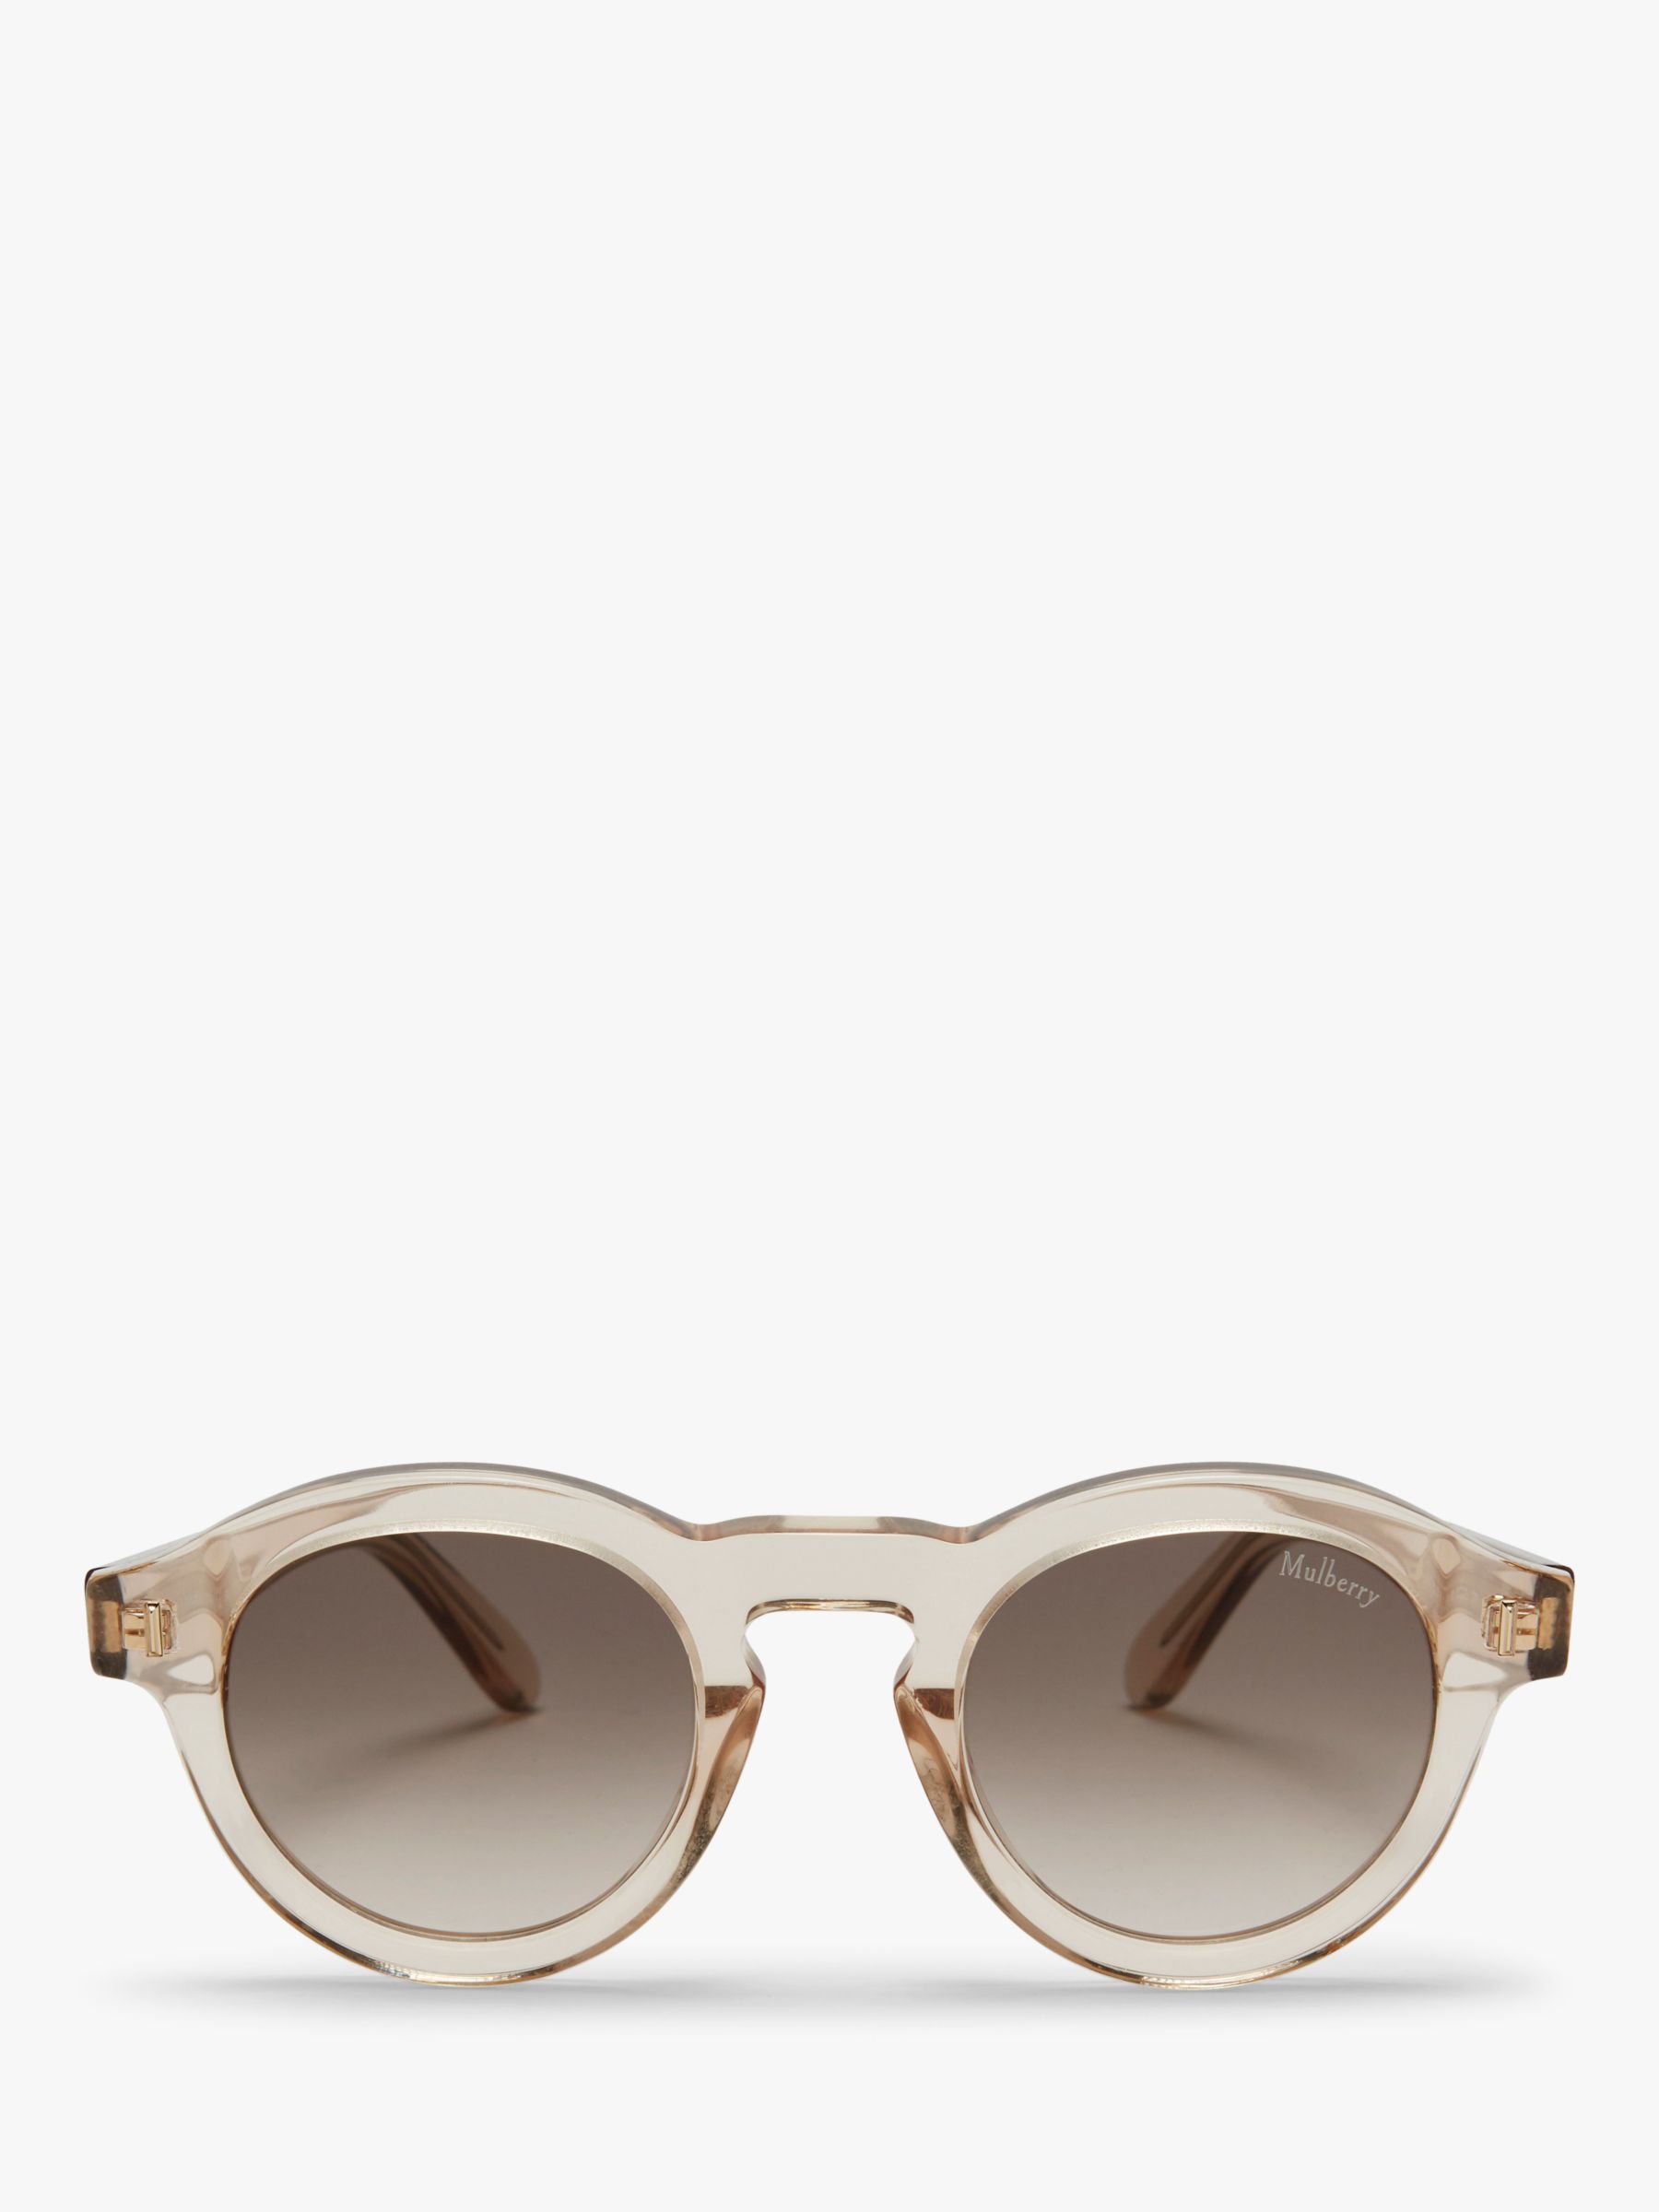 Mulberry Women's Gian Round Sunglasses, Beige Clear/Brown Gradient at ...